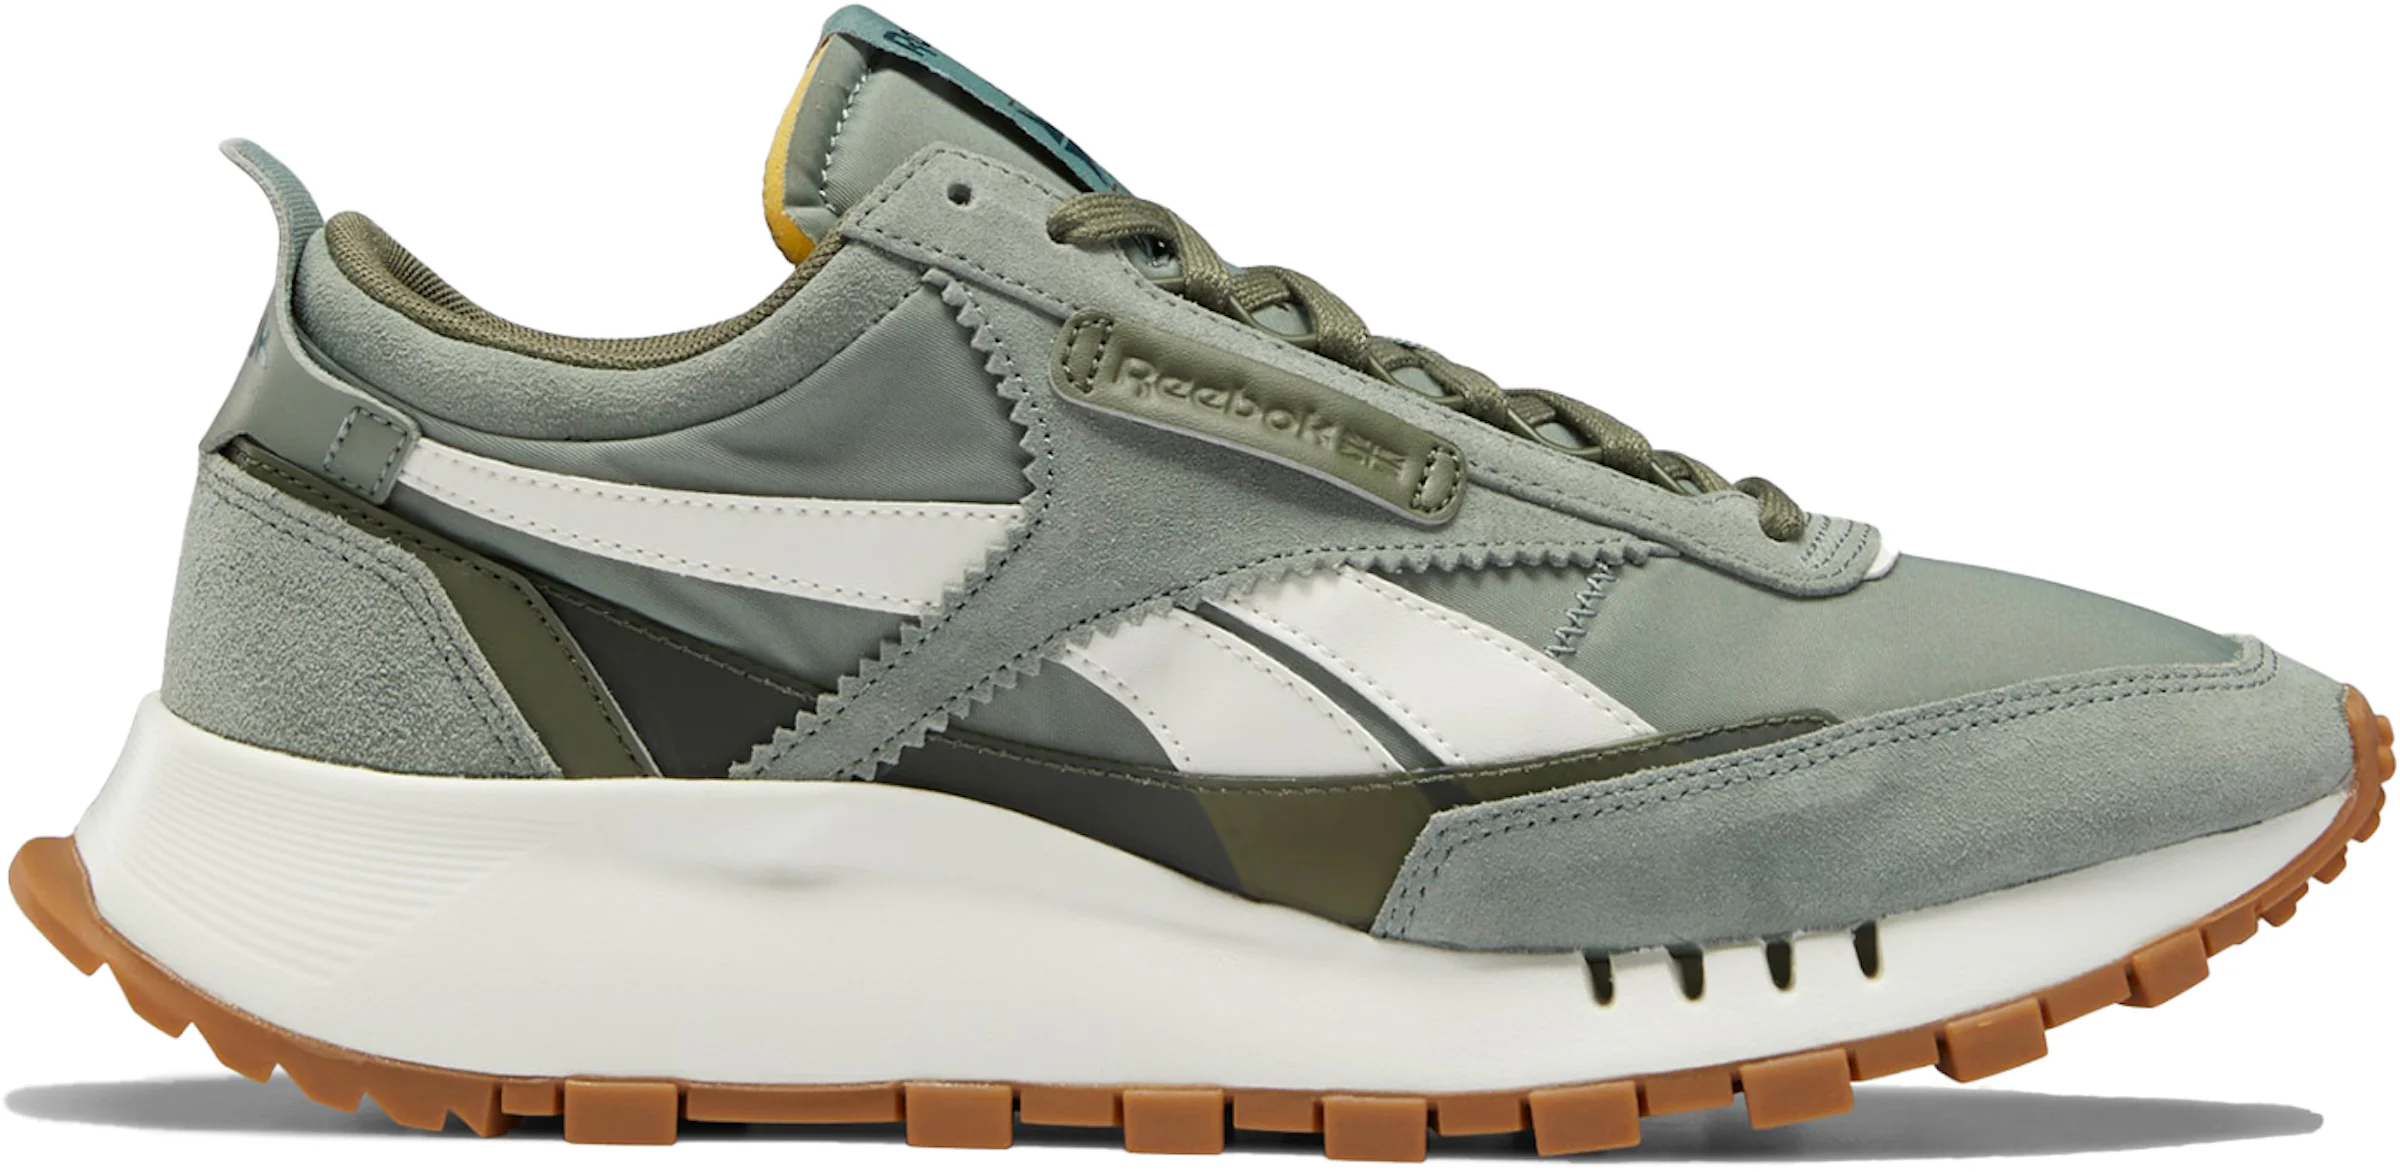 https://images.stockx.com/images/Reebok-Classic-Leather-Legacy-Harmony-Green-Gum.jpg?fit=fill&bg=FFFFFF&w=1200&h=857&fm=webp&auto=compress&dpr=2&trim=color&updated_at=1658780204&q=60